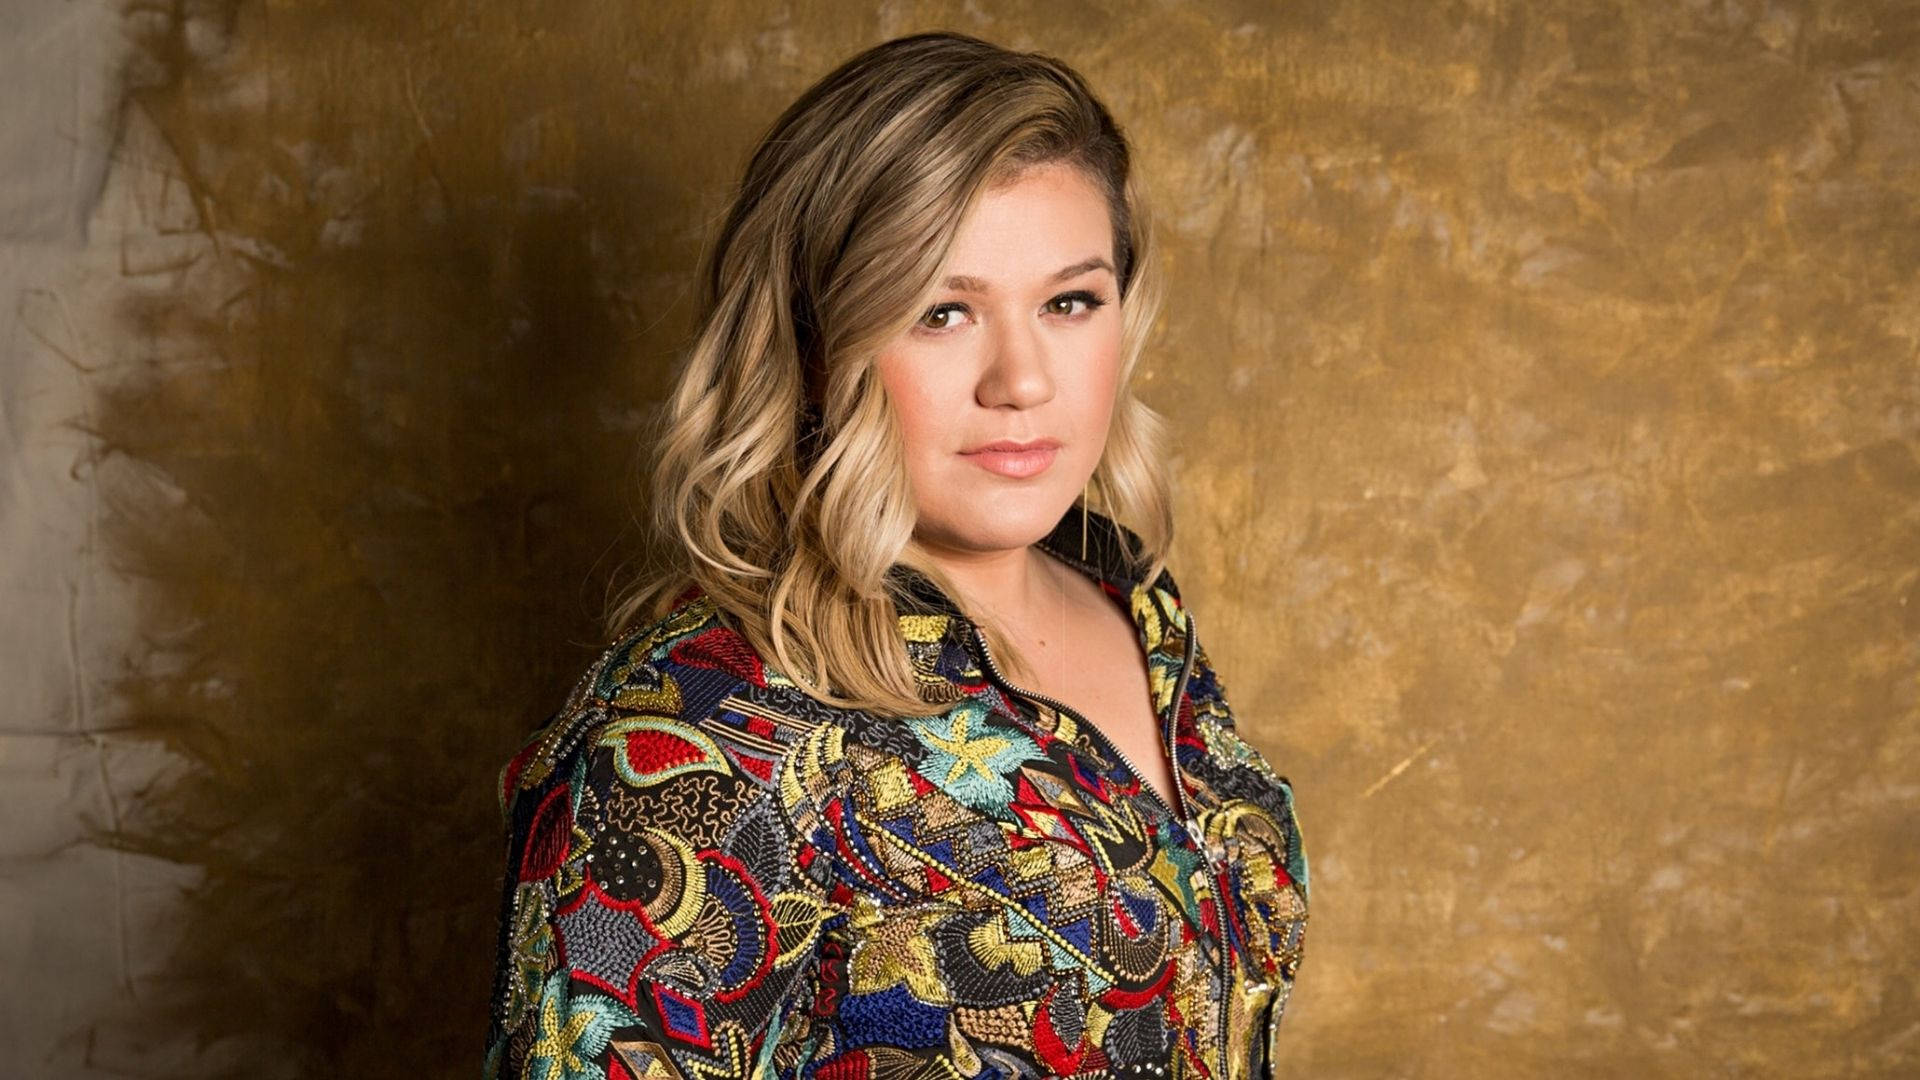 Kelly Clarkson In Colorful Dress Background